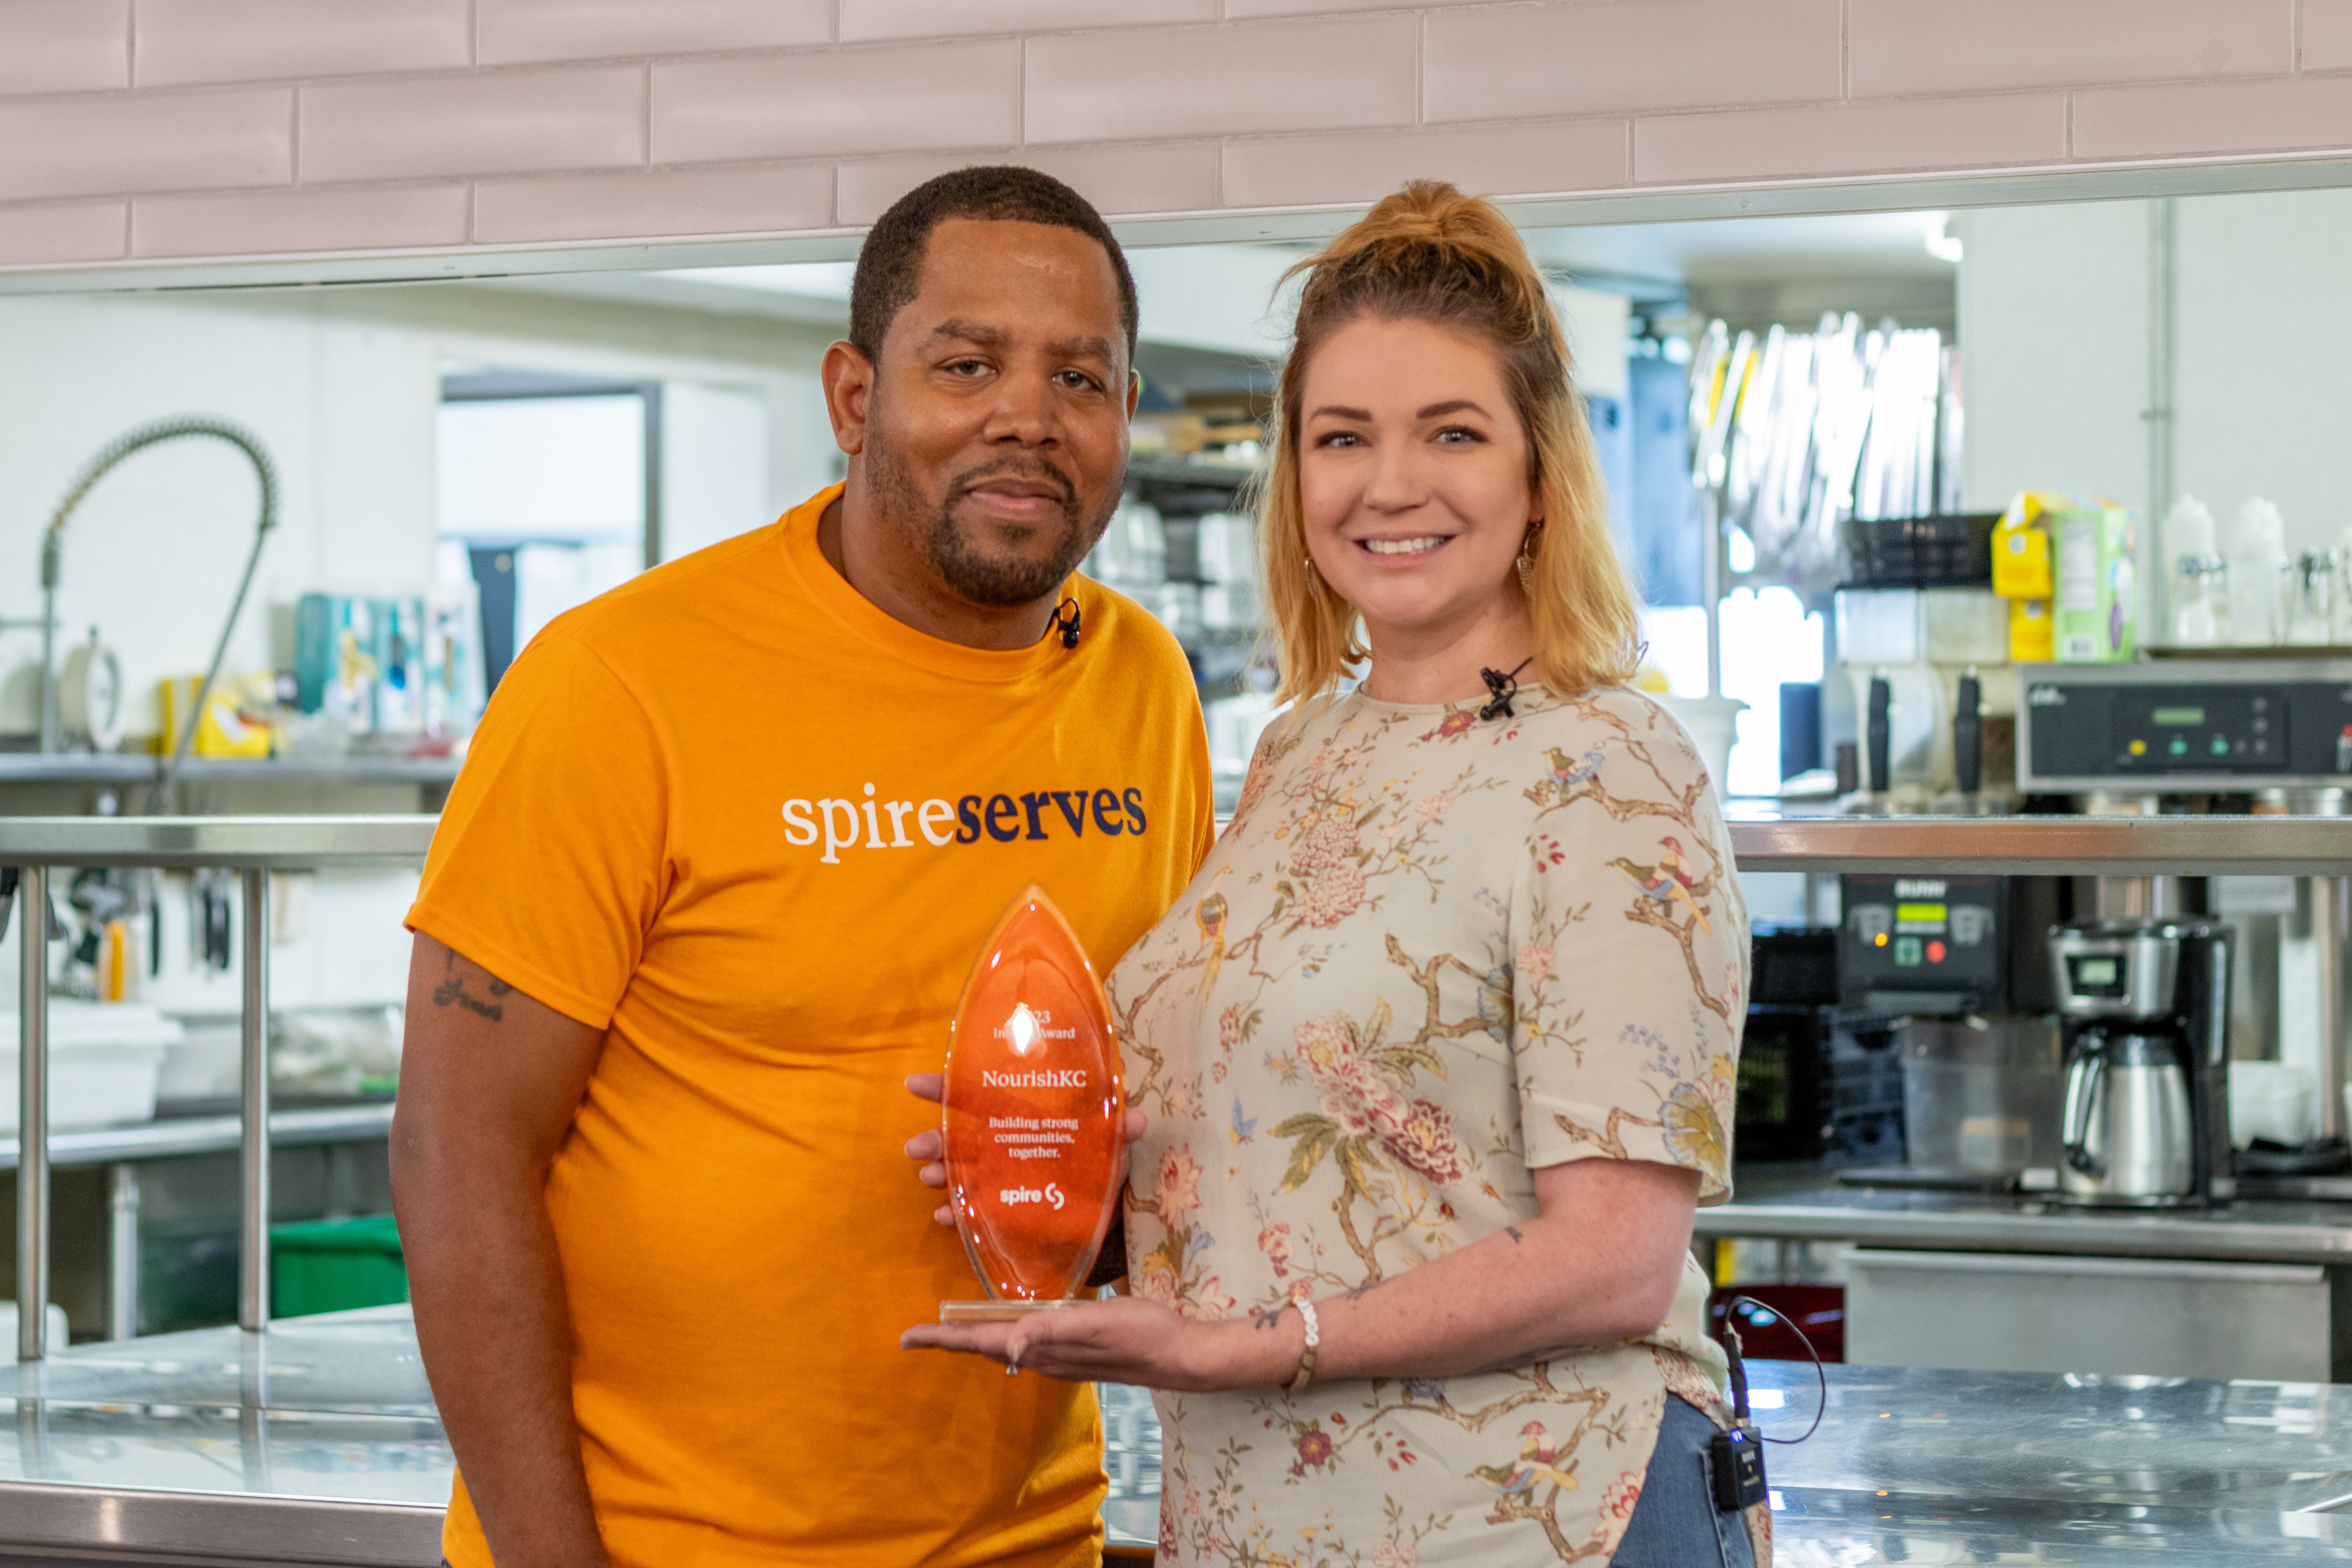 Spire employee with presenting award to woman